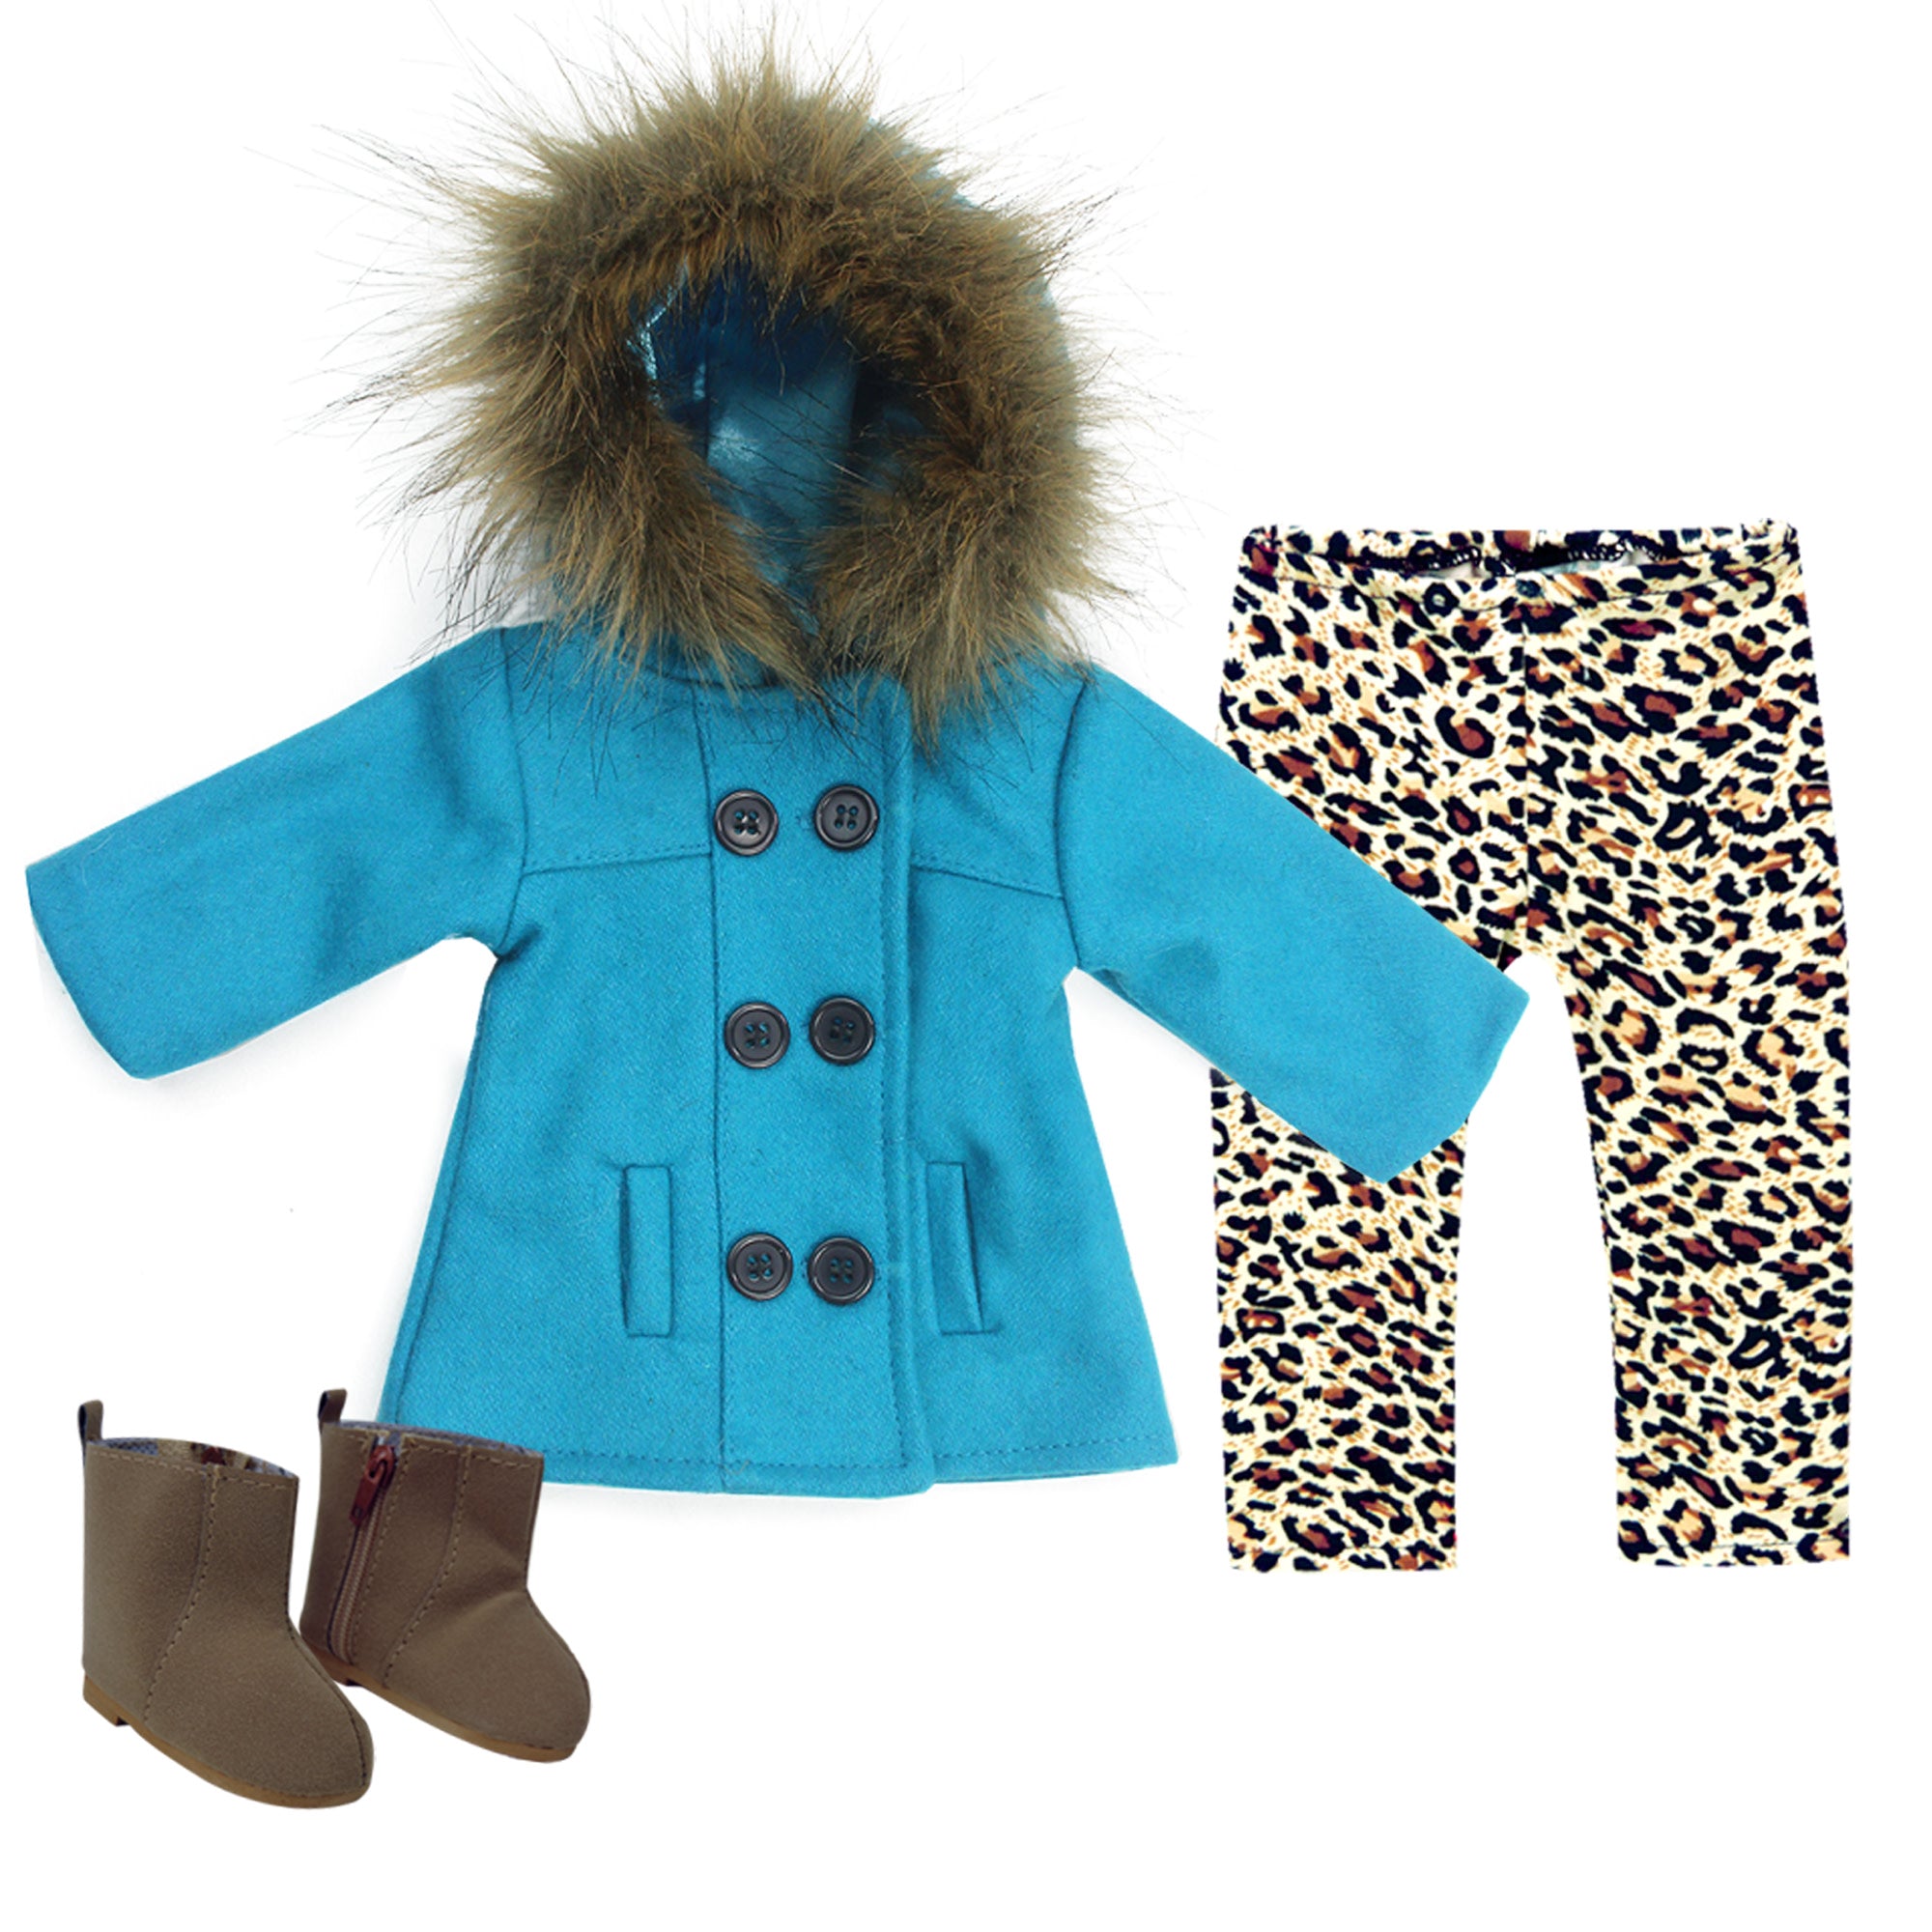 Sophia's 3 Piece Winter Set Includes Fur Trimmed Pea Coat, Animal Print Leggings and Boots for 18" Dolls, Turquoise/Brown